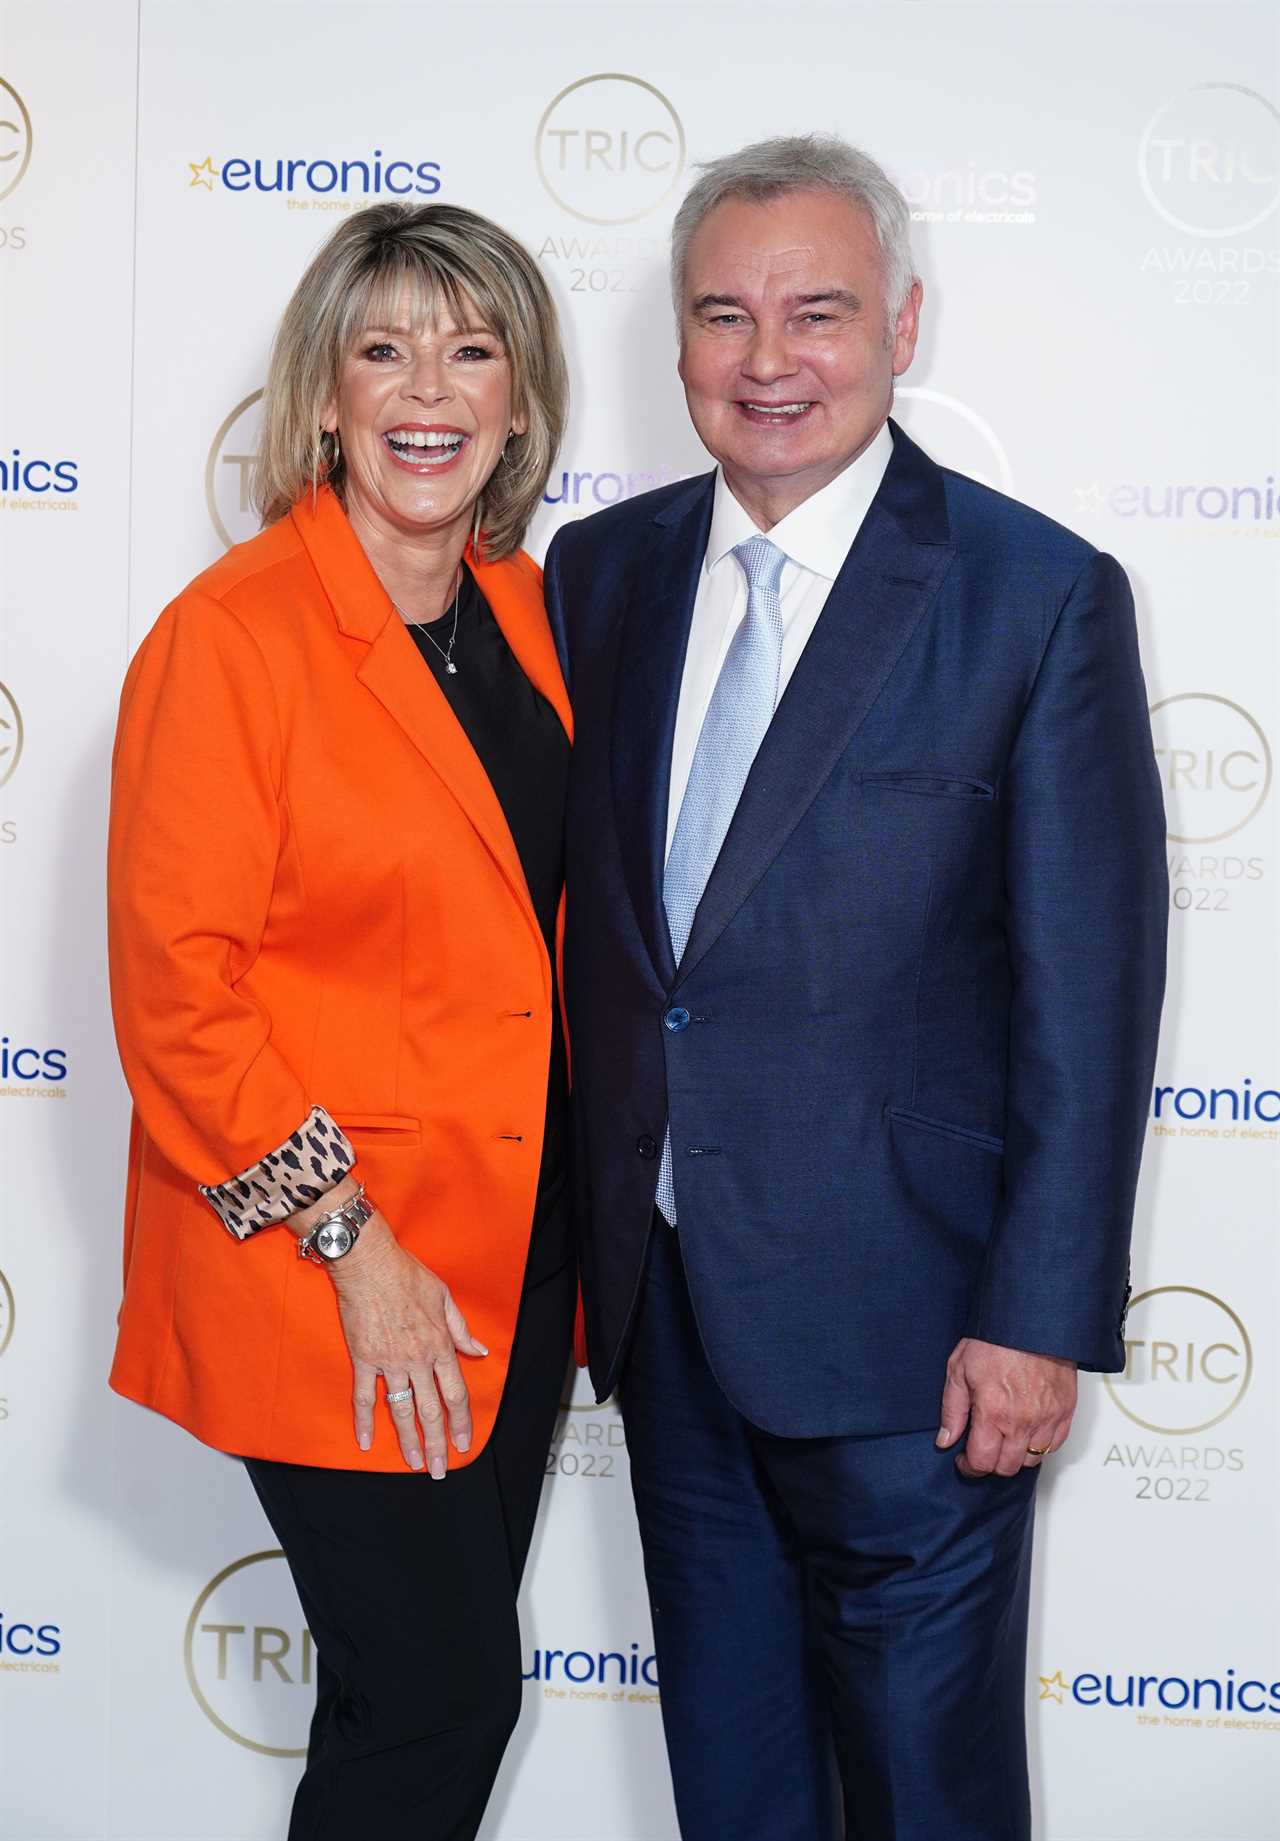 Ruth Langsford sparks fears about Eammon Holmes after Christmas post